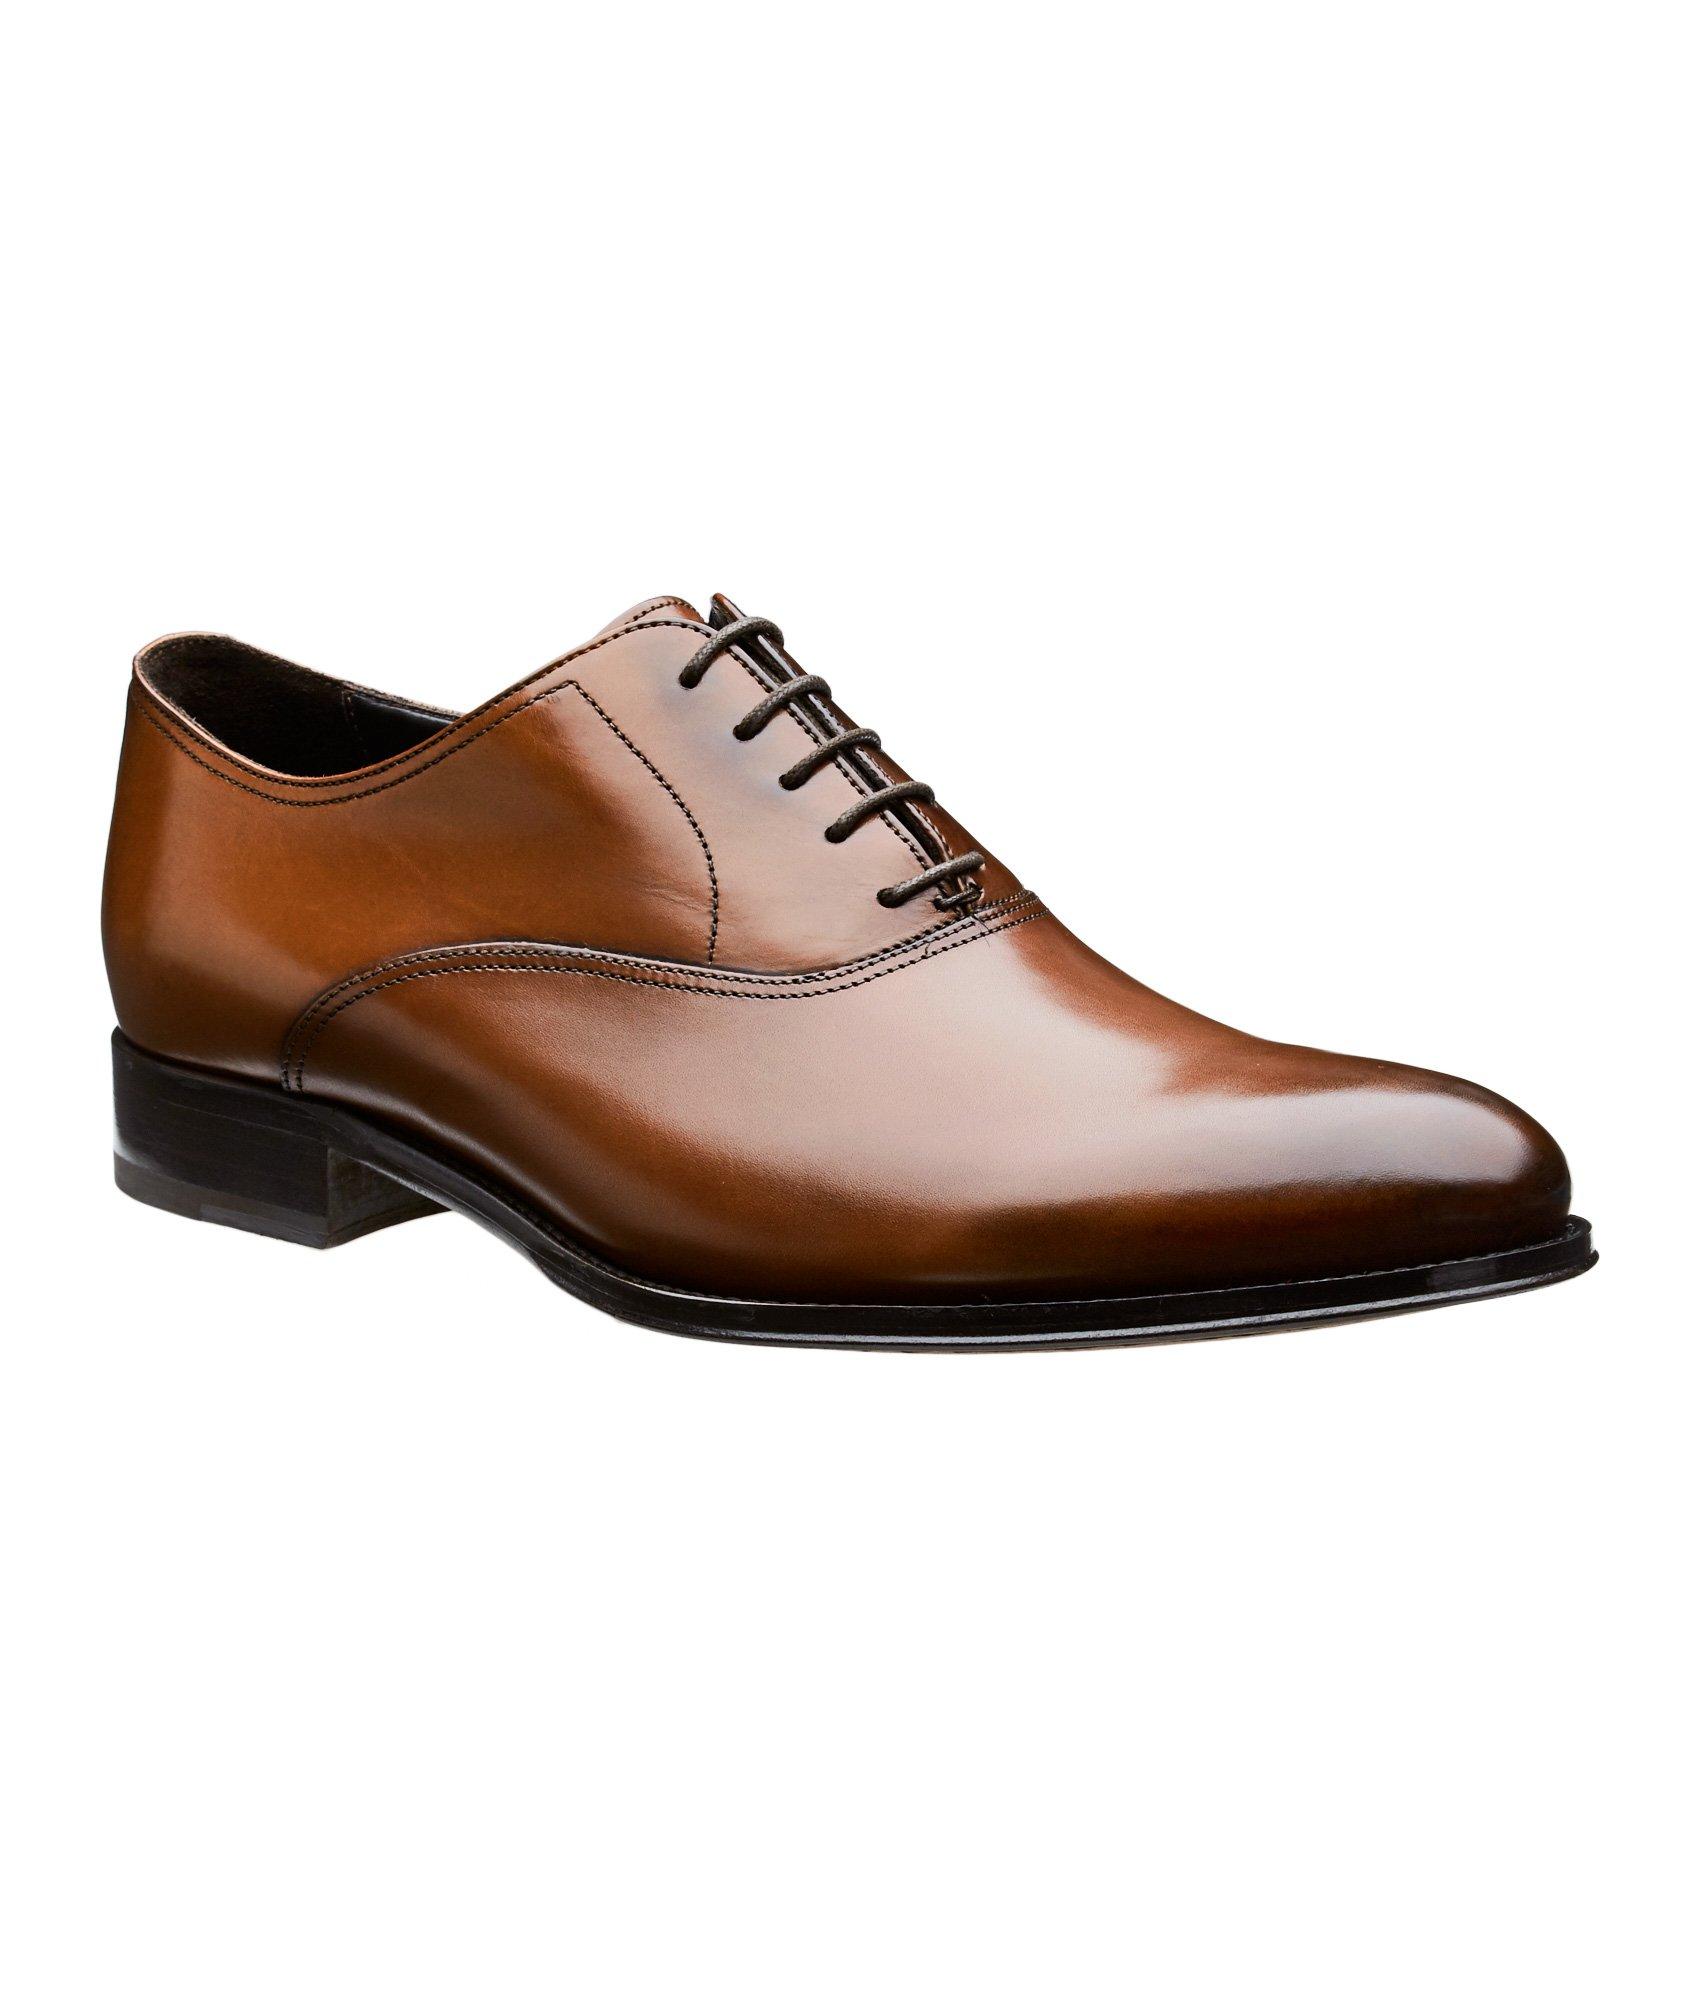 Langford Leather Oxfords image 0